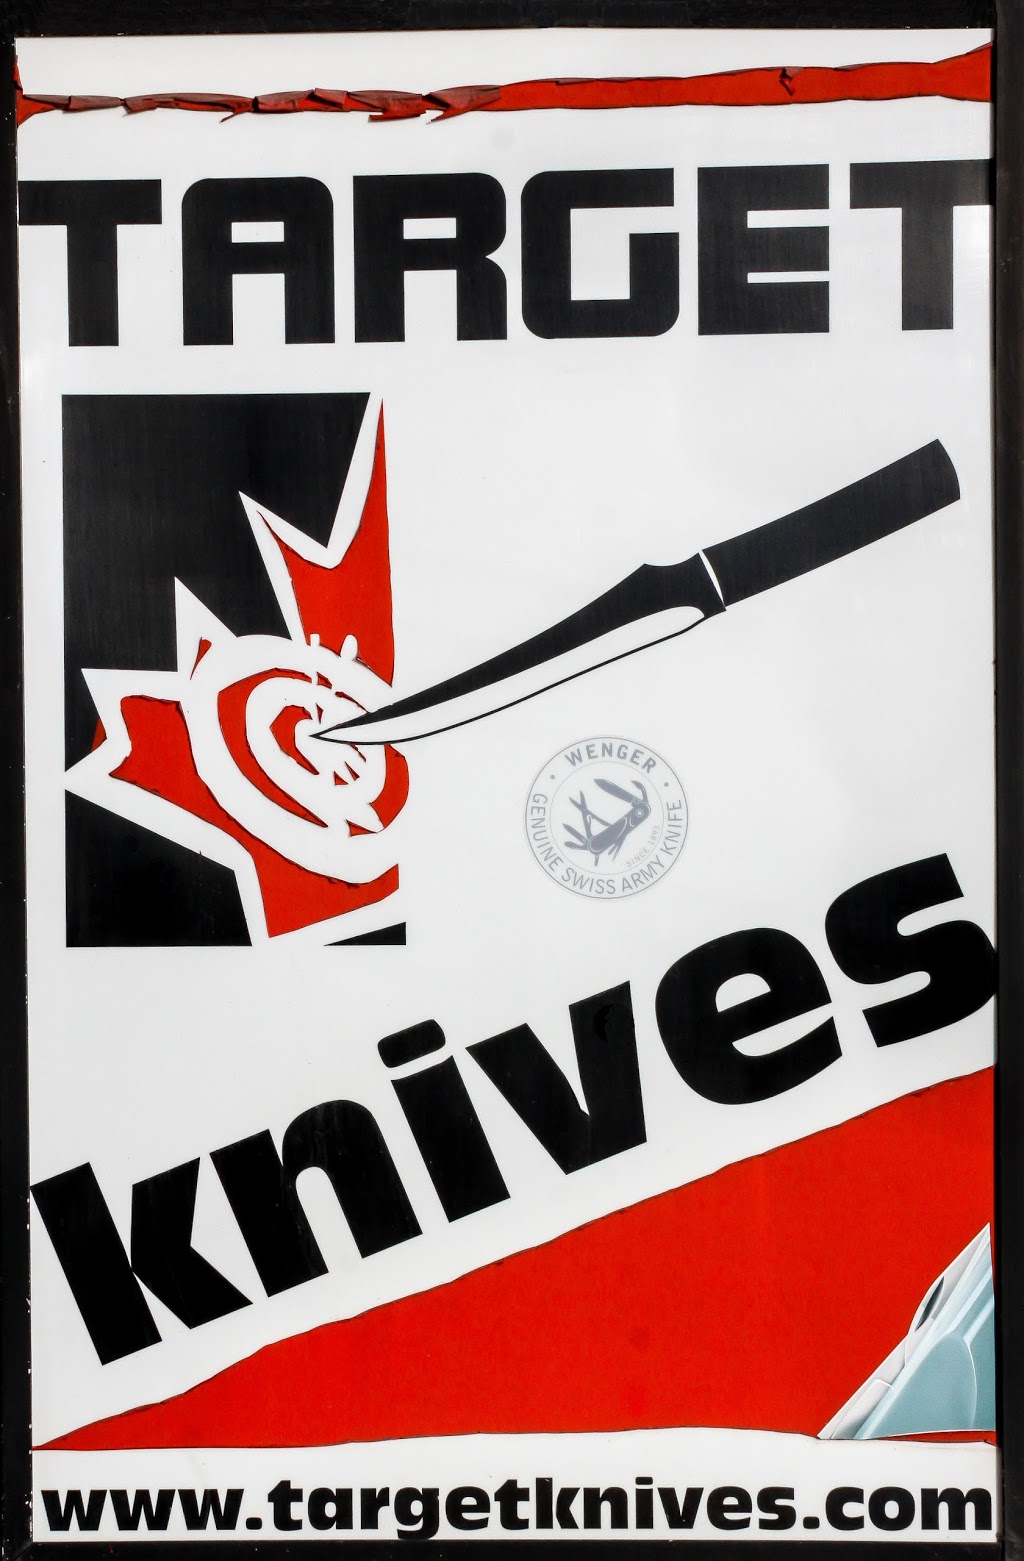 Target Knives | store | 5005 Macleod Trail SW, Calgary, AB T2G 0A9, Canada | 4032436996 OR +1 403-243-6996